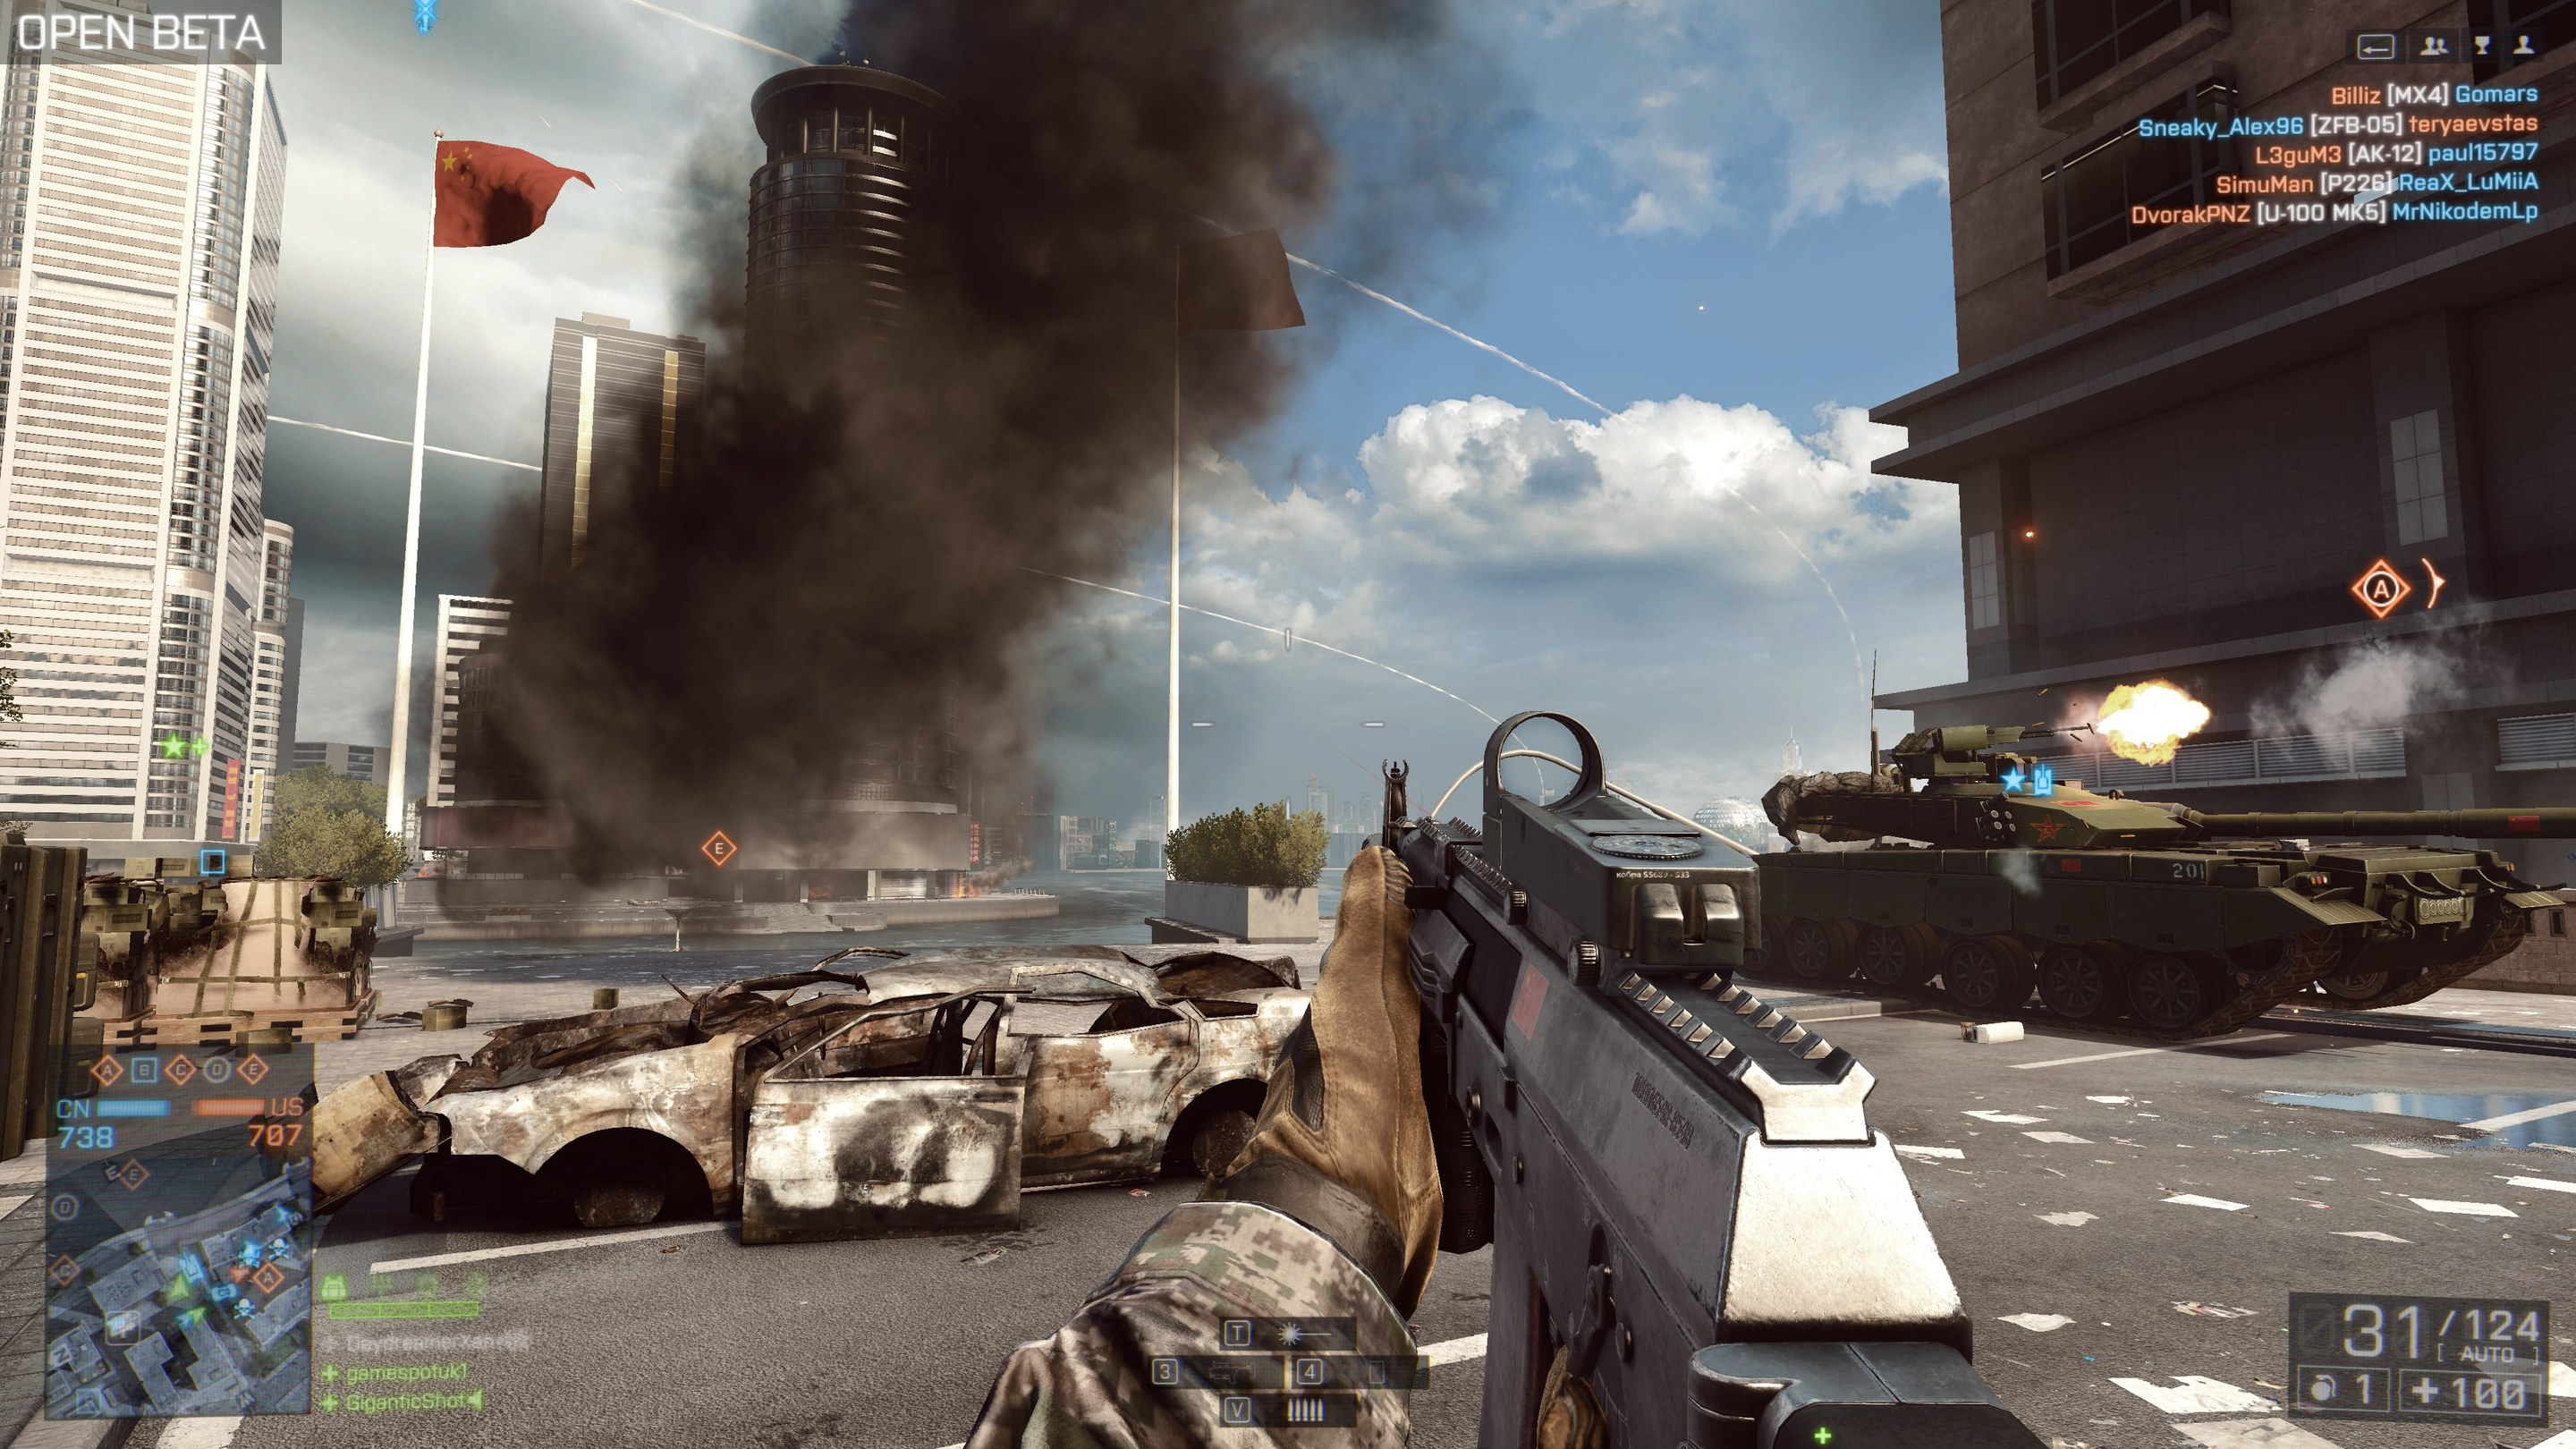 acknowledges that Battlefield 4 PC crashes "affecting a large number - GameSpot